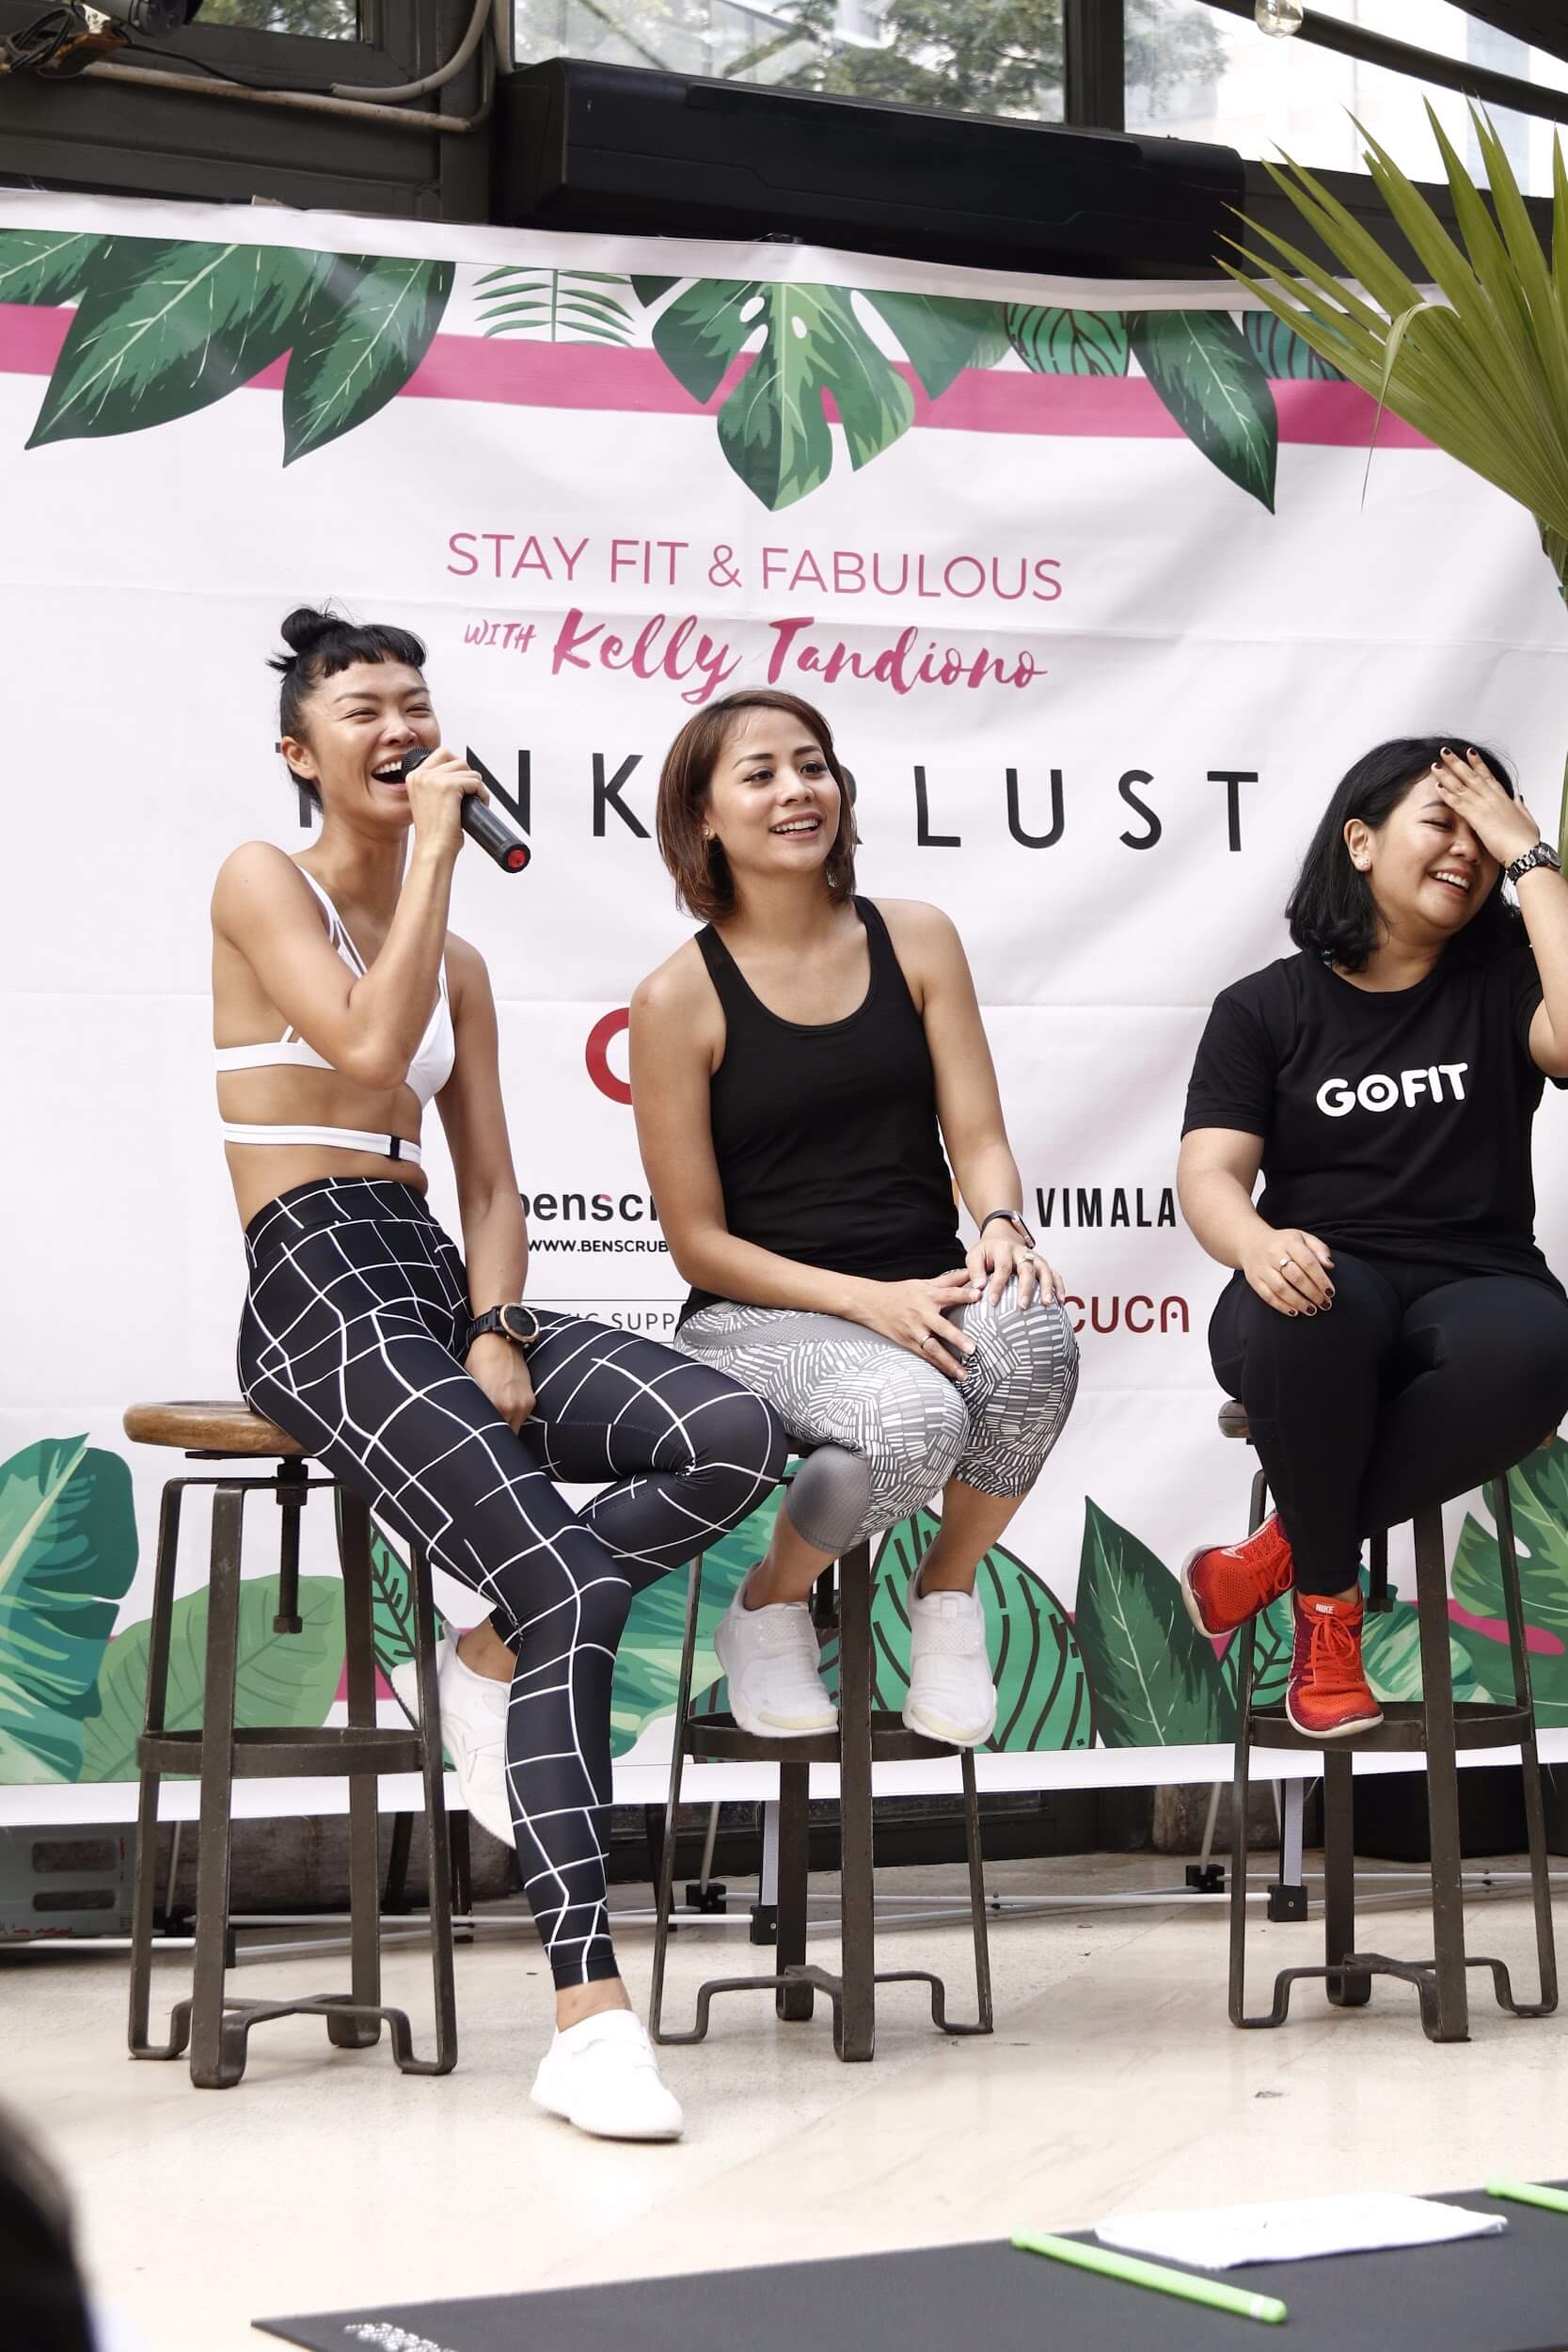 Stay Fit and Fabulous with Kelly Tandiono #TinkerlustxGoFitxKelly Event